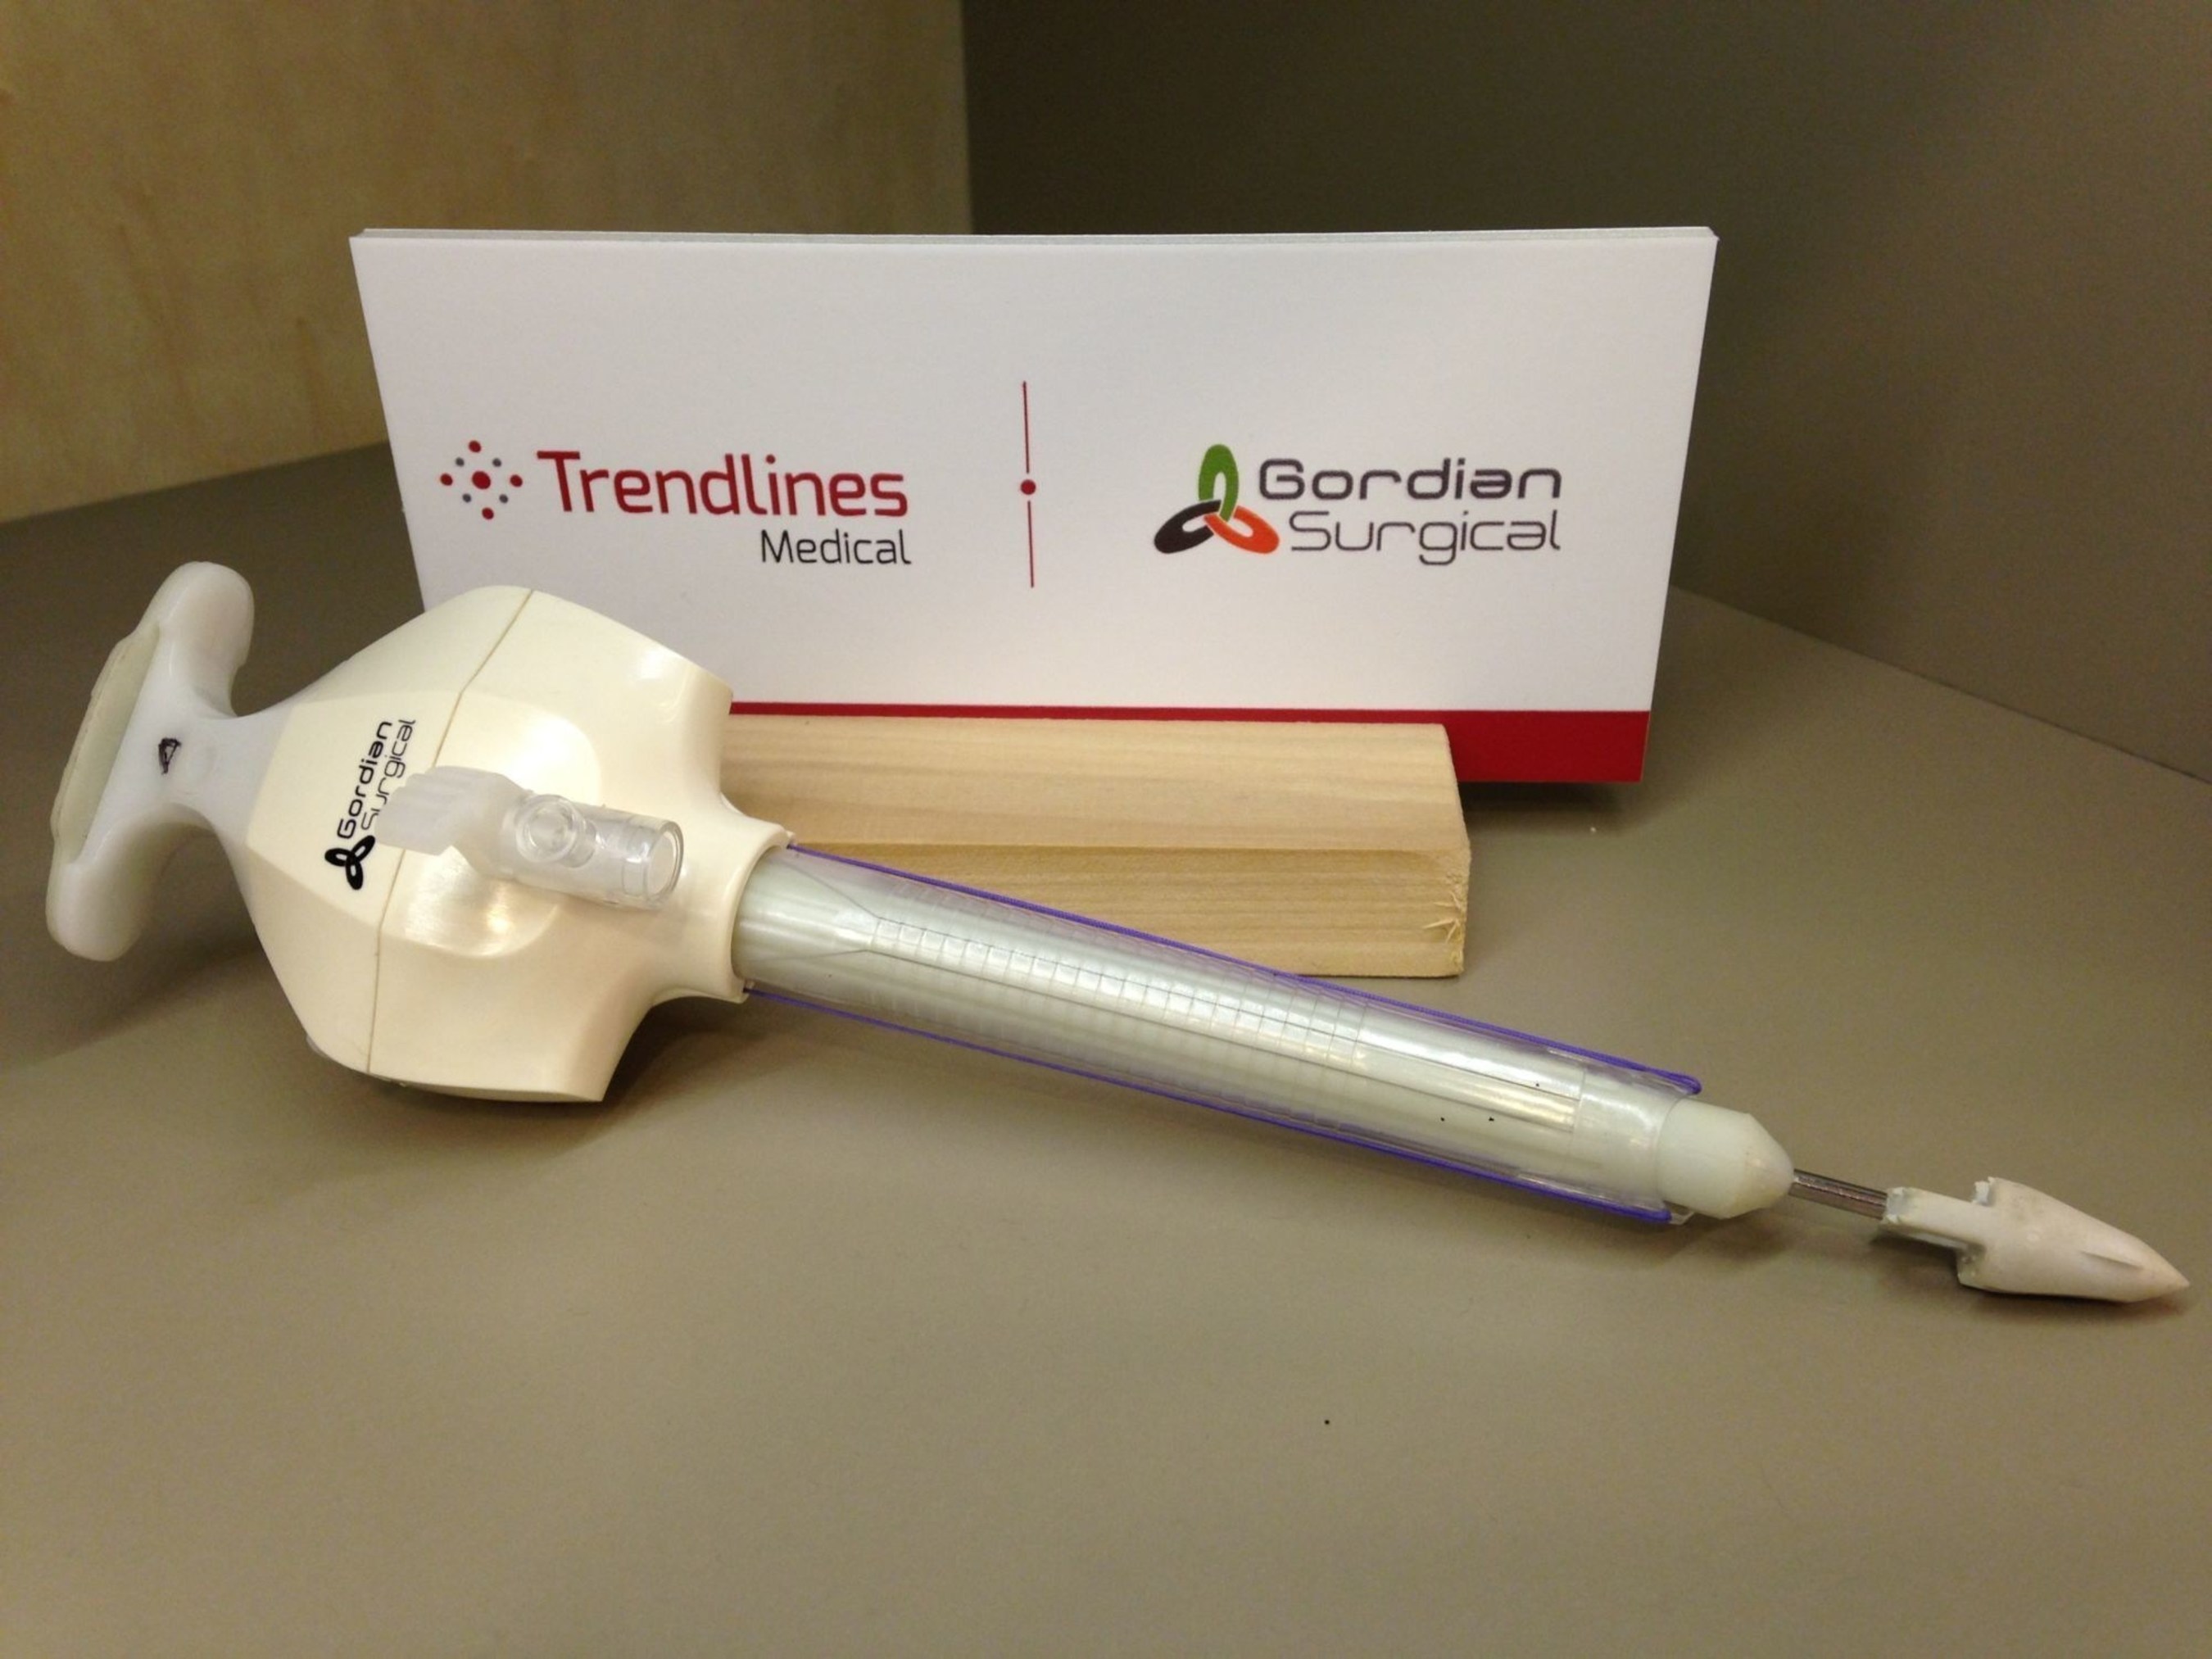 The Gordian Surgical two-in-one trocar and closure device - TroClose1200(TM).  Photo courtesy of The Trendlines Group